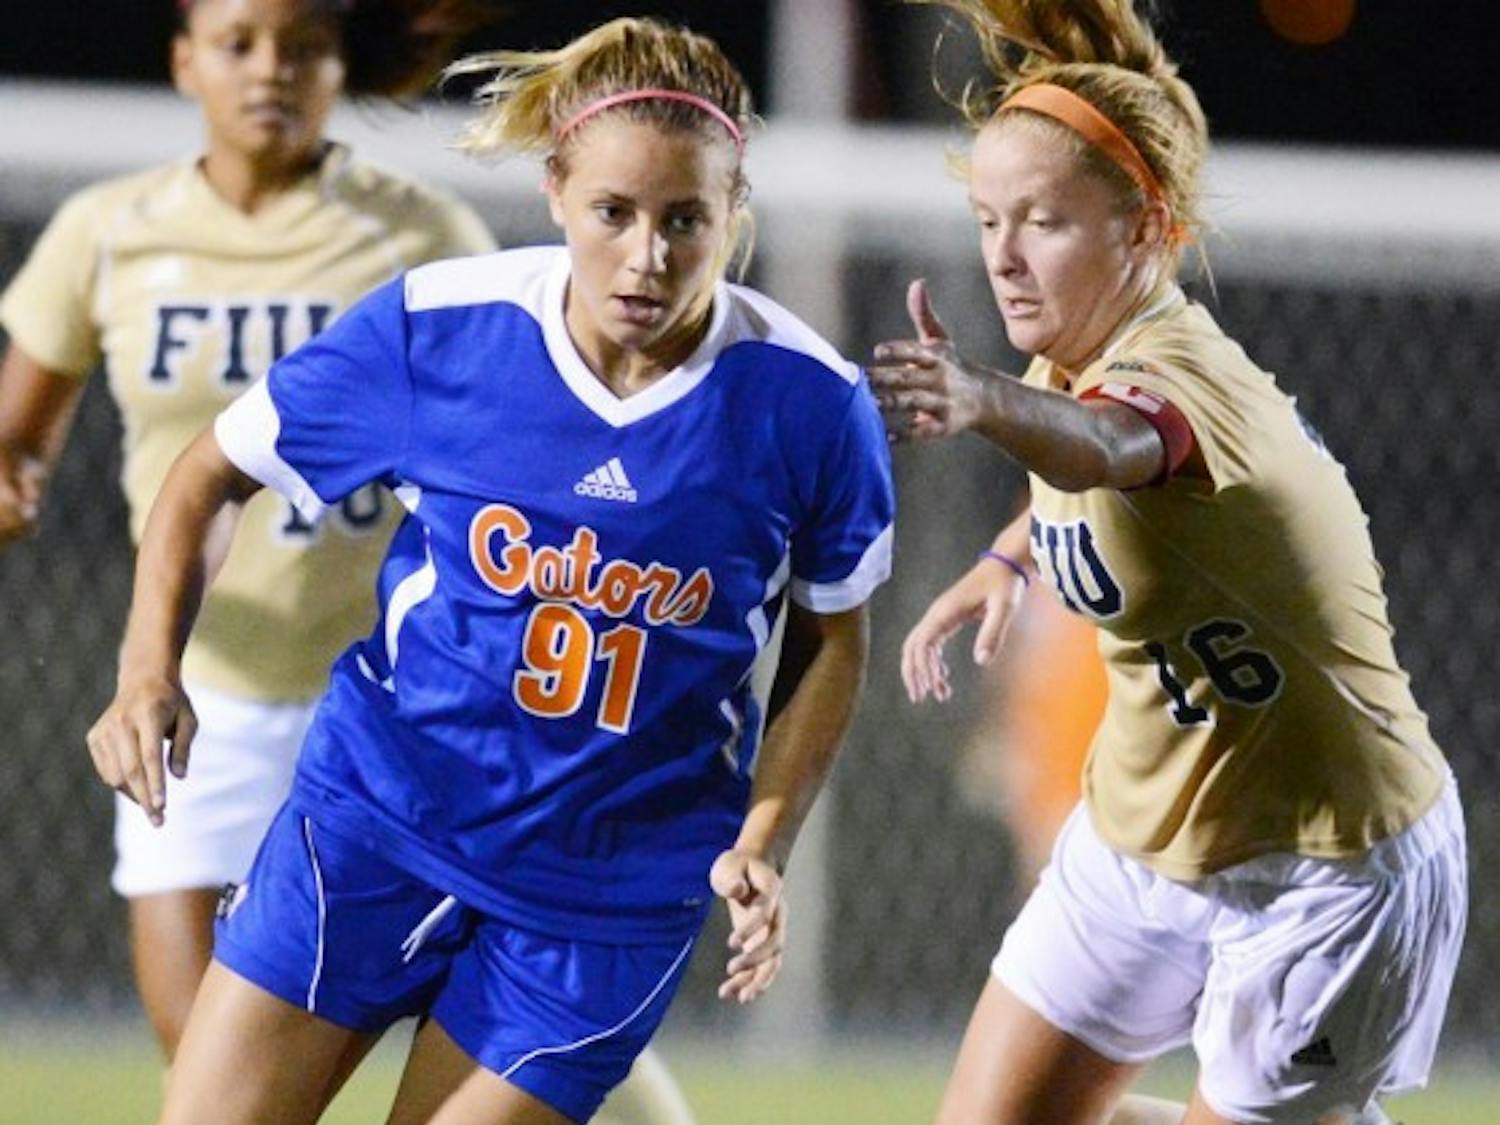 Adriana Leon (91) gets past Nicole Diperna (16) of Florida International University during UF's 3-0 win on Sept. 2. Leon scored the game-winning goal in overtime against Auburn on Sunday at the AU Soccer Complex.